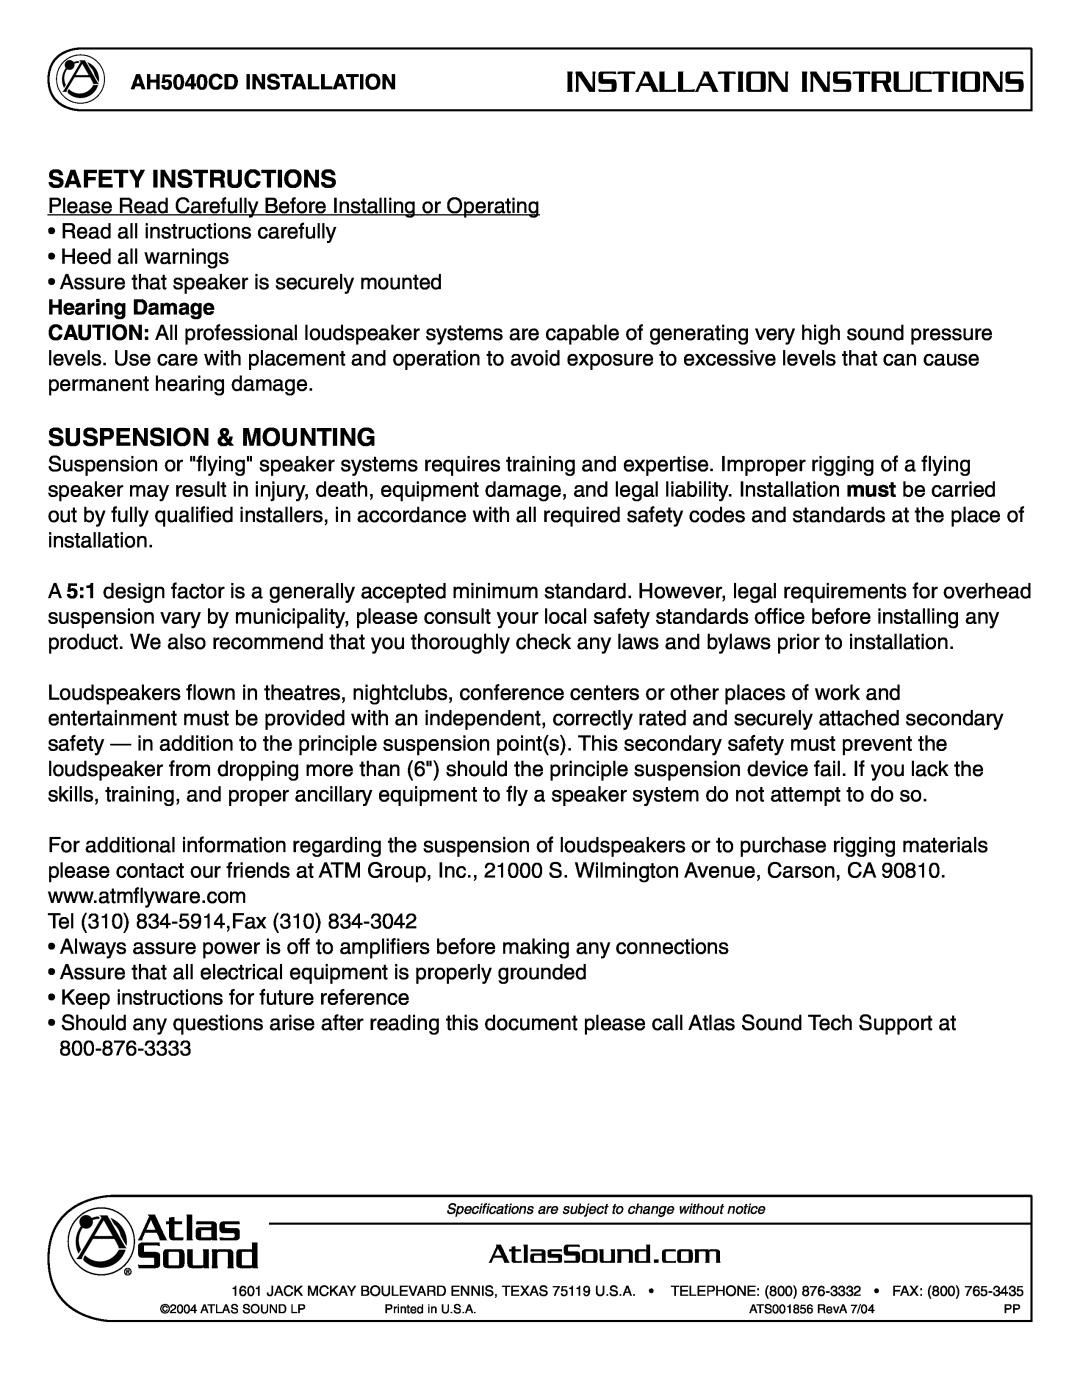 Atlas Sound specifications Safety Instructions, Suspension & Mounting, Installation Instructions, AH5040CD INSTALLATION 